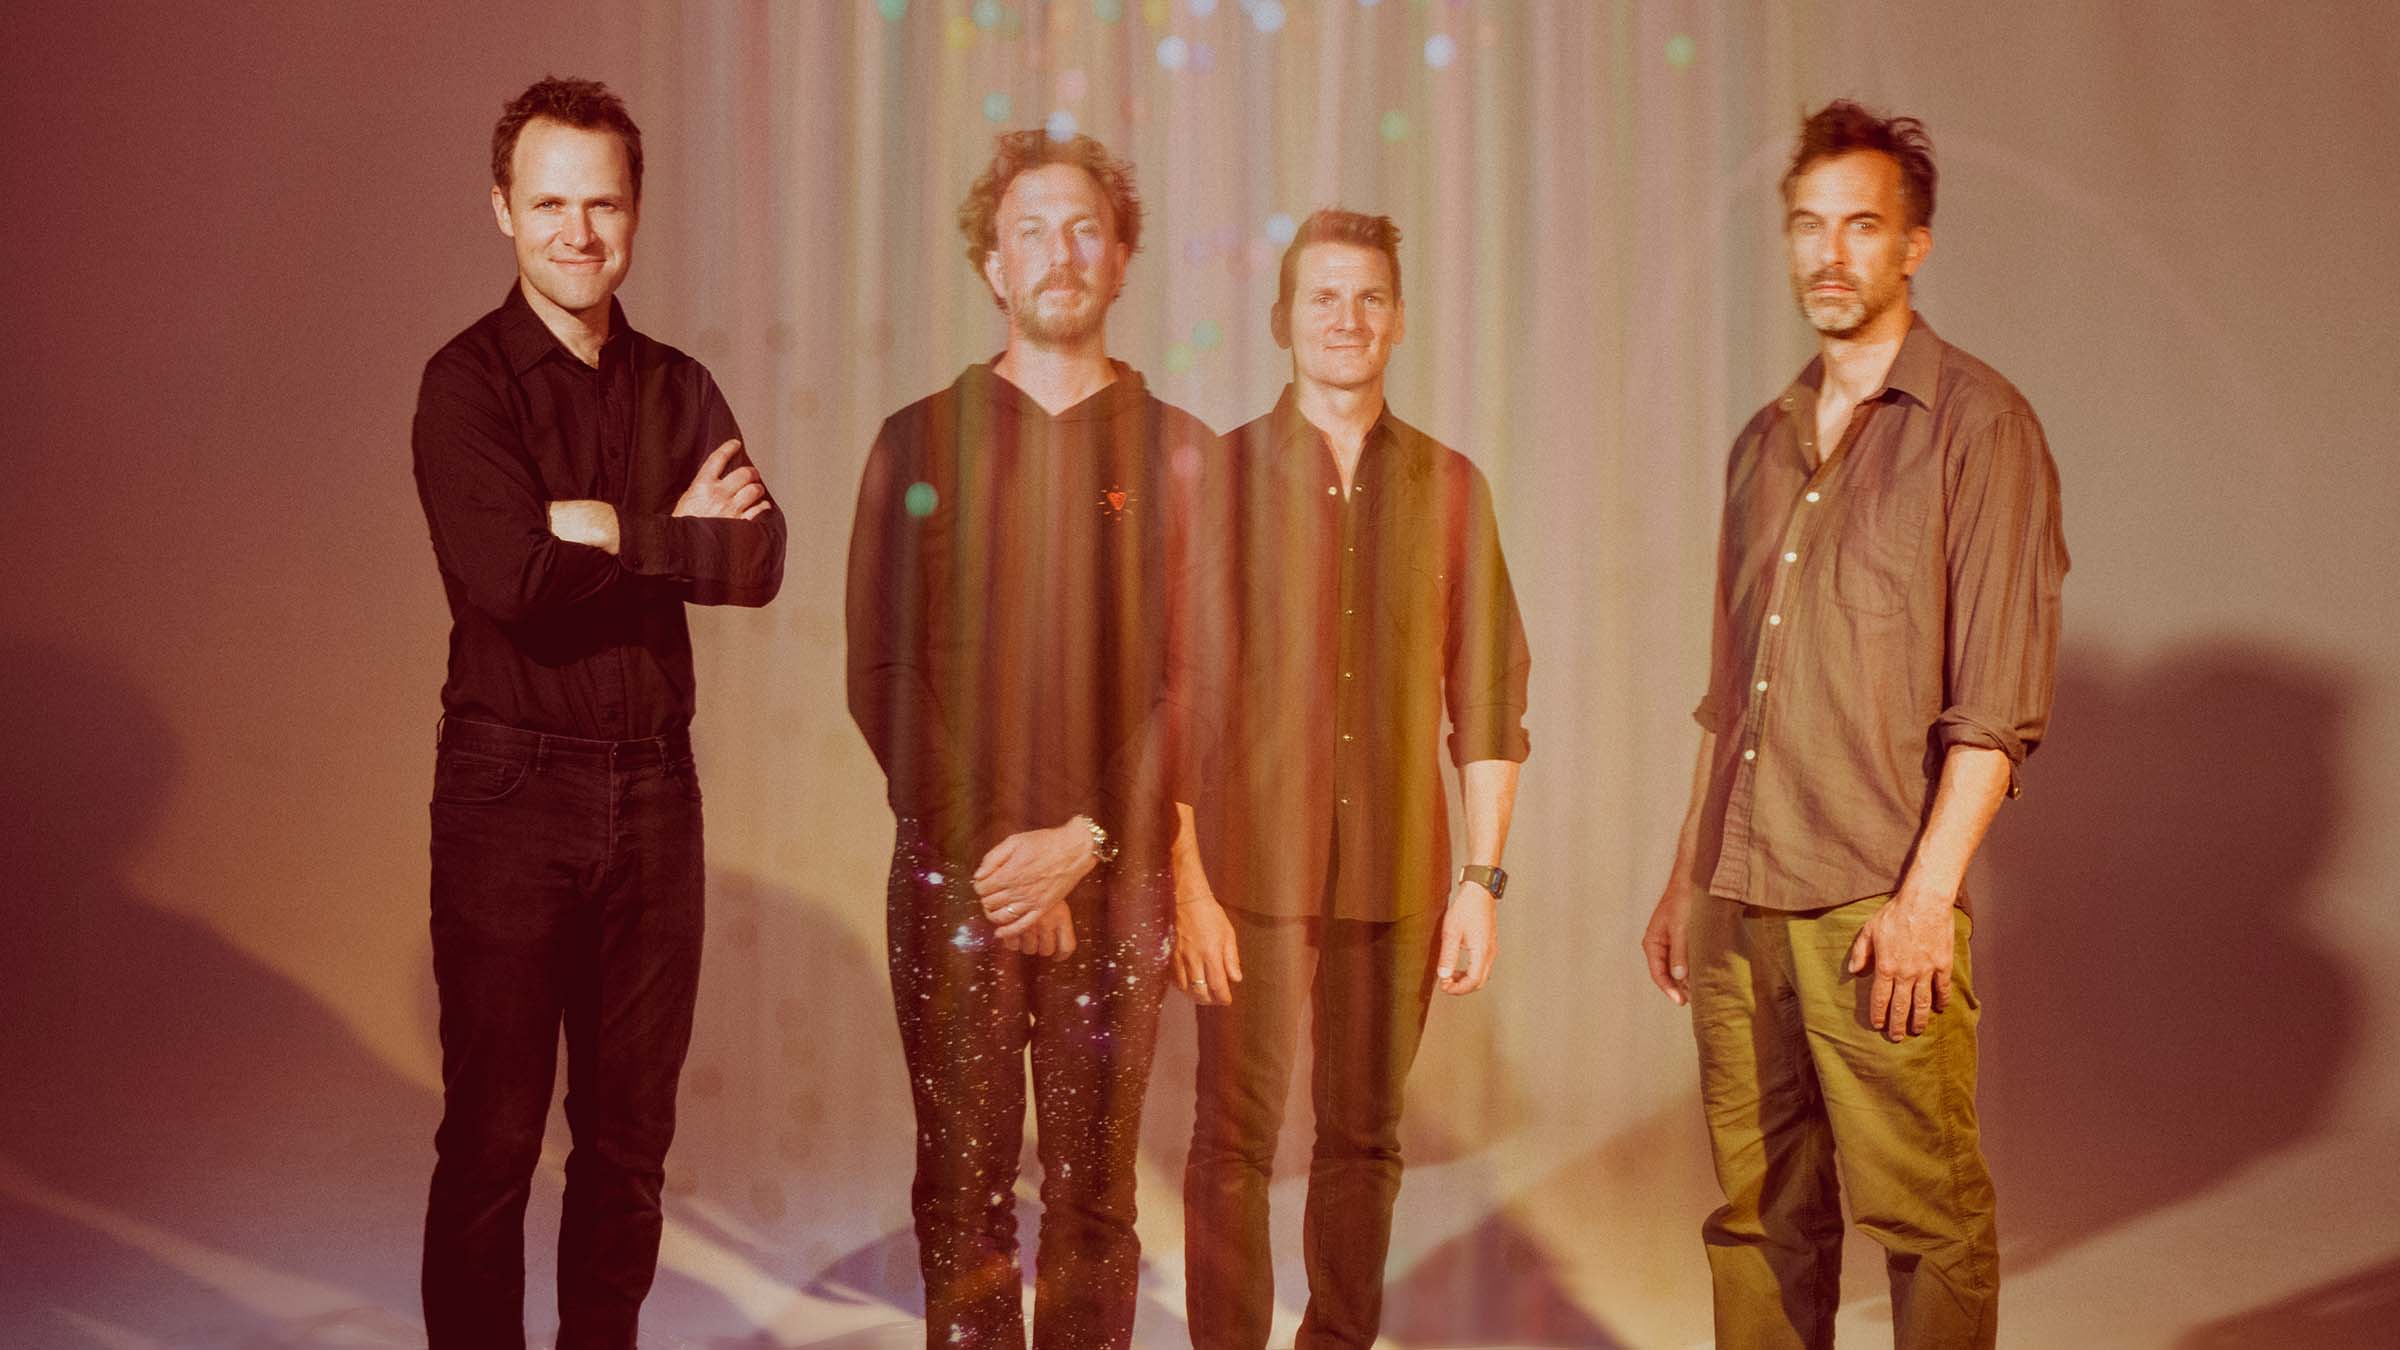 Band, Guster, poses for a picture